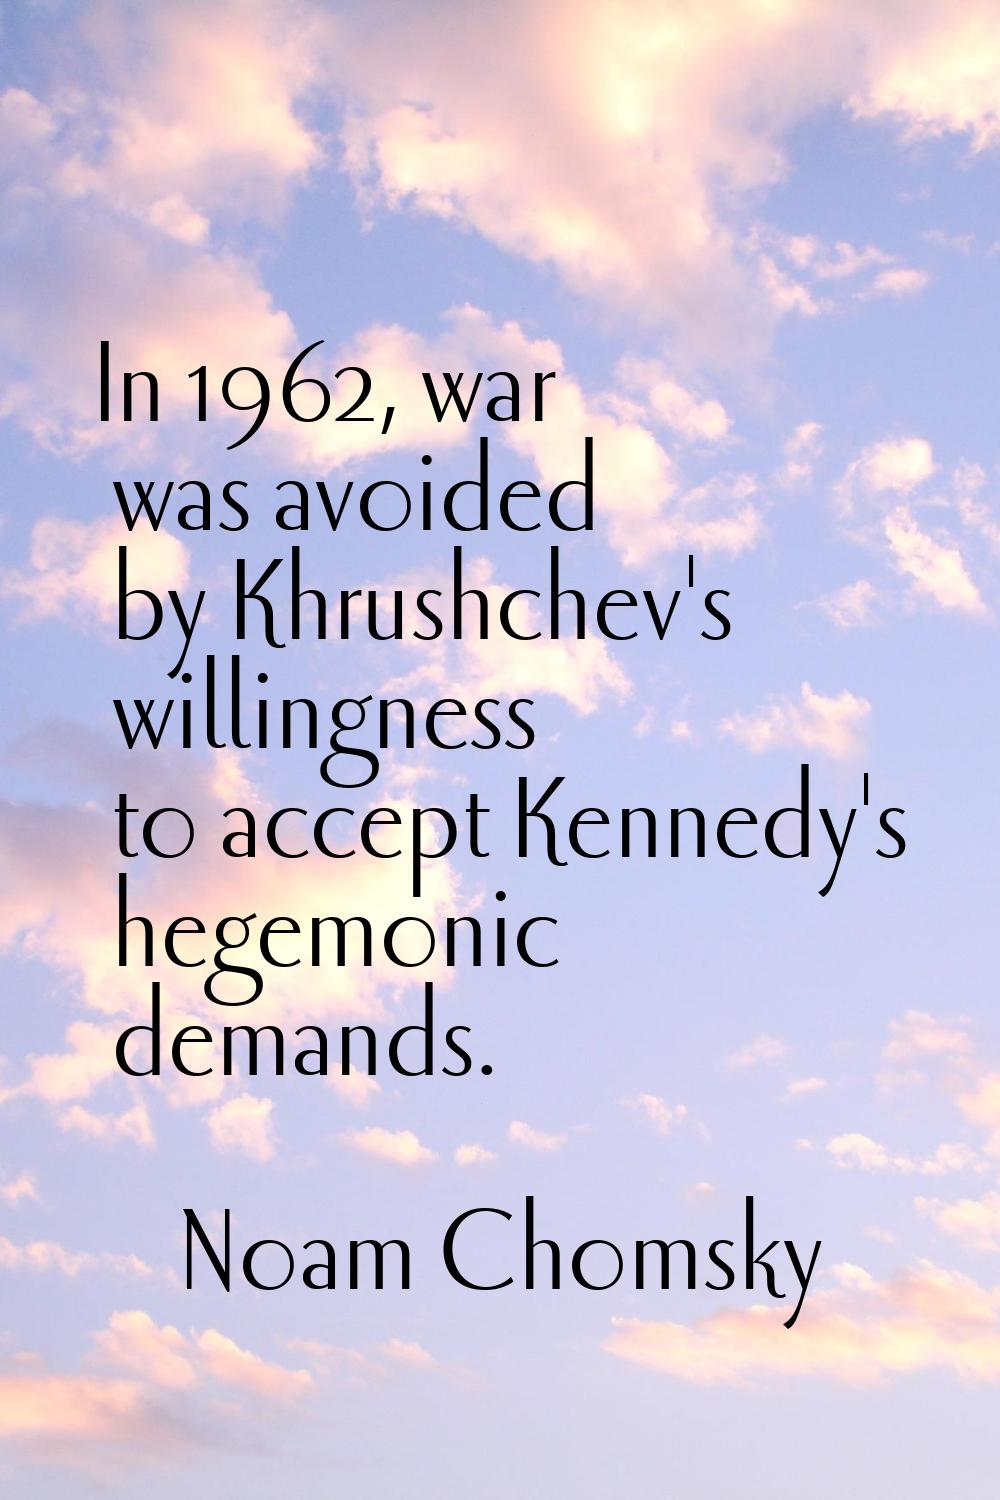 In 1962, war was avoided by Khrushchev's willingness to accept Kennedy's hegemonic demands.